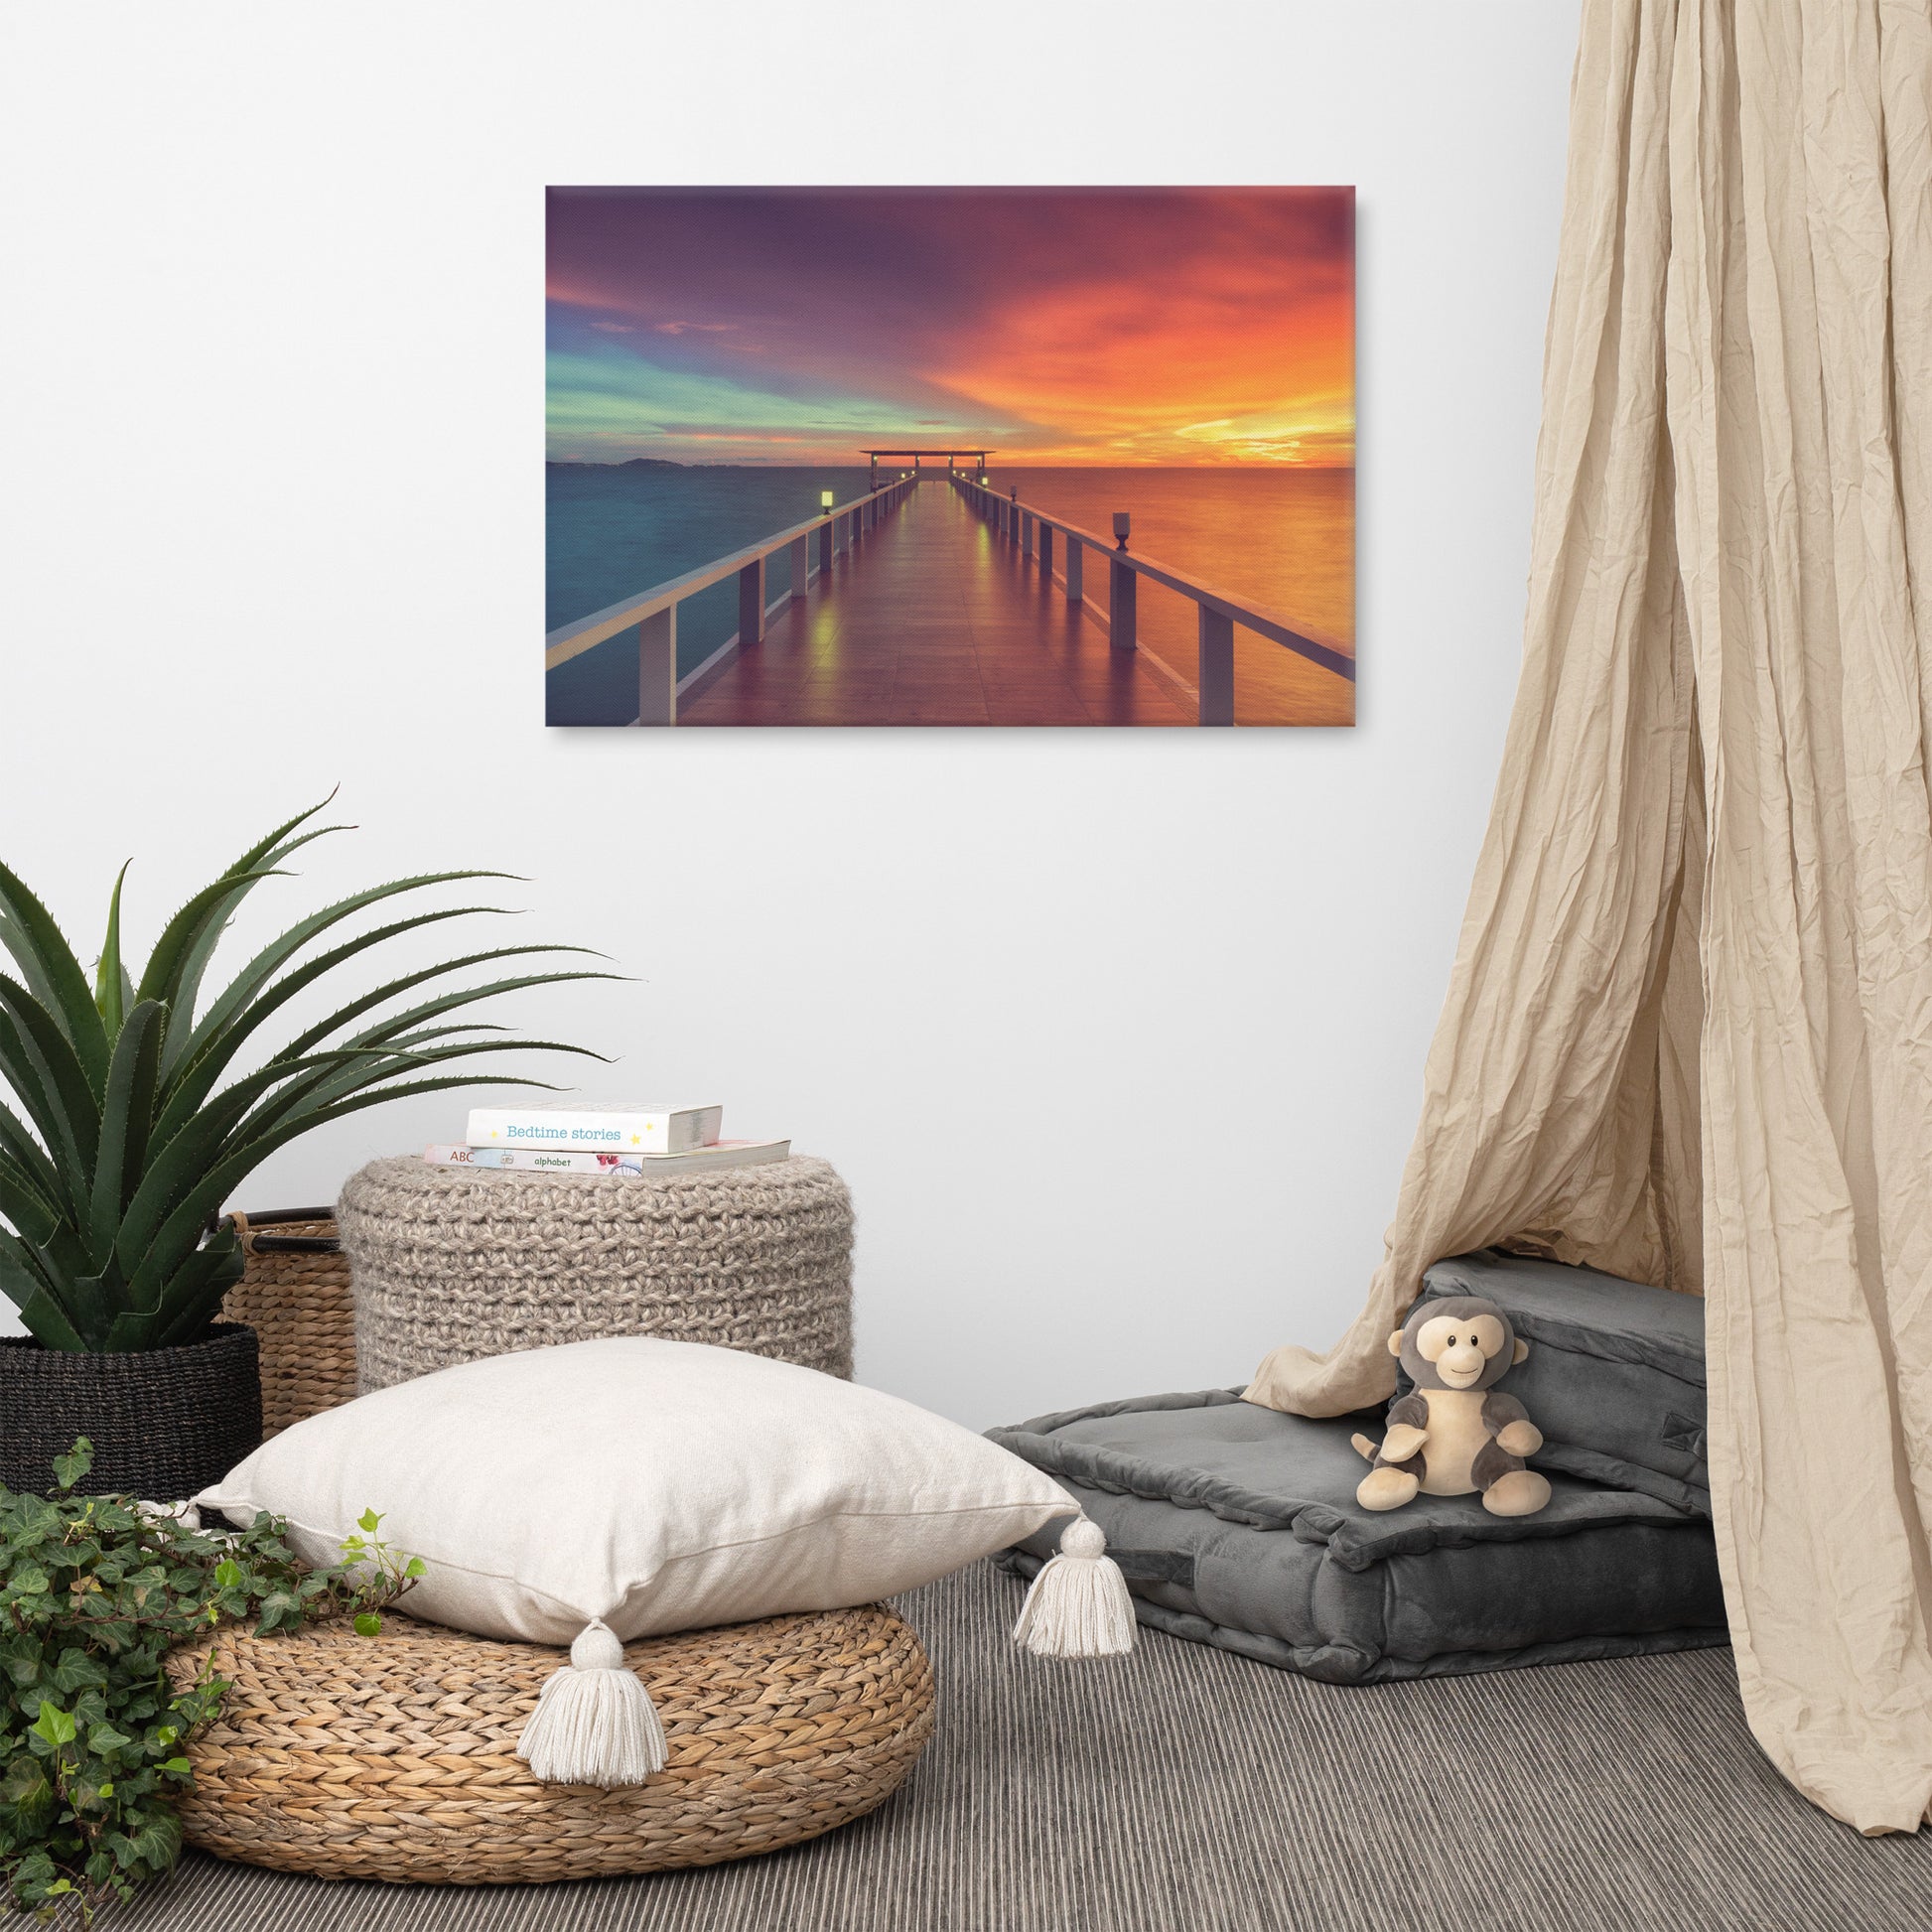 Zen Wall Art For Bedroom: Surreal Wooden Pier At Sunset with Intrigued Effect Landscape Photo Canvas Wall Art Prints